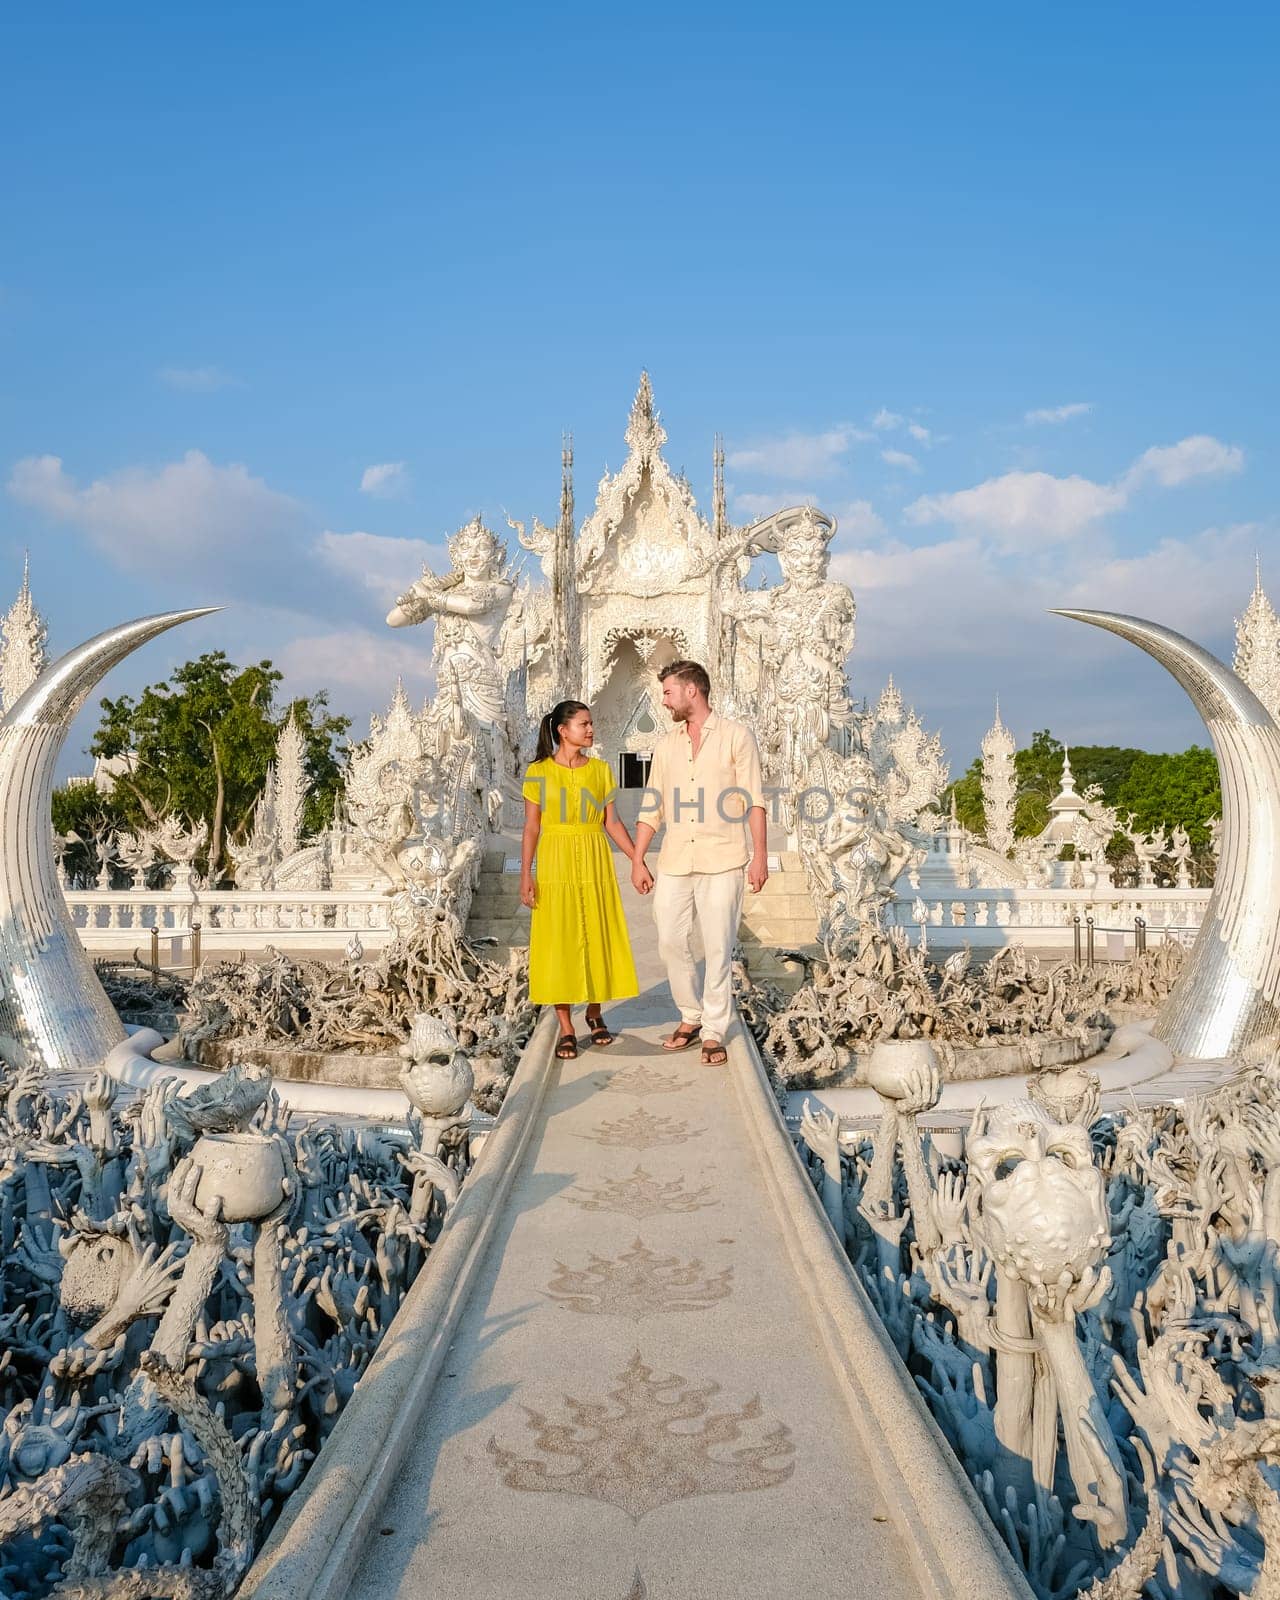 White Temple Chiang Rai Thailand, a diverse couple of men and women visit Wat Rong Khun temple in Northern Thailand.